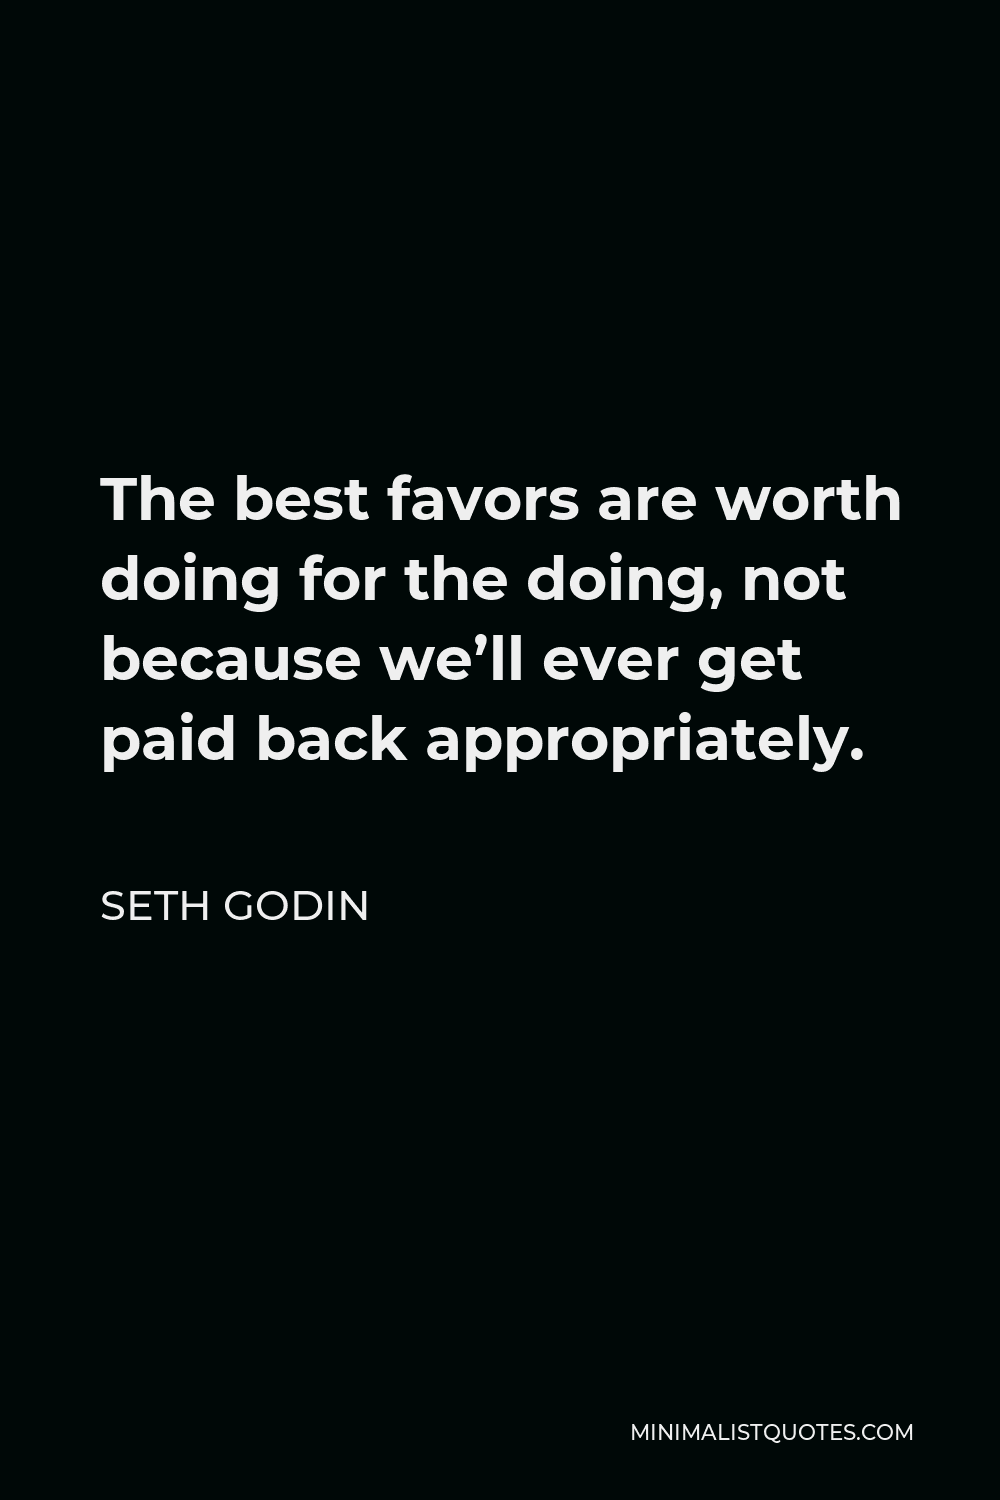 Seth Godin Quote - The best favors are worth doing for the doing, not because we’ll ever get paid back appropriately.